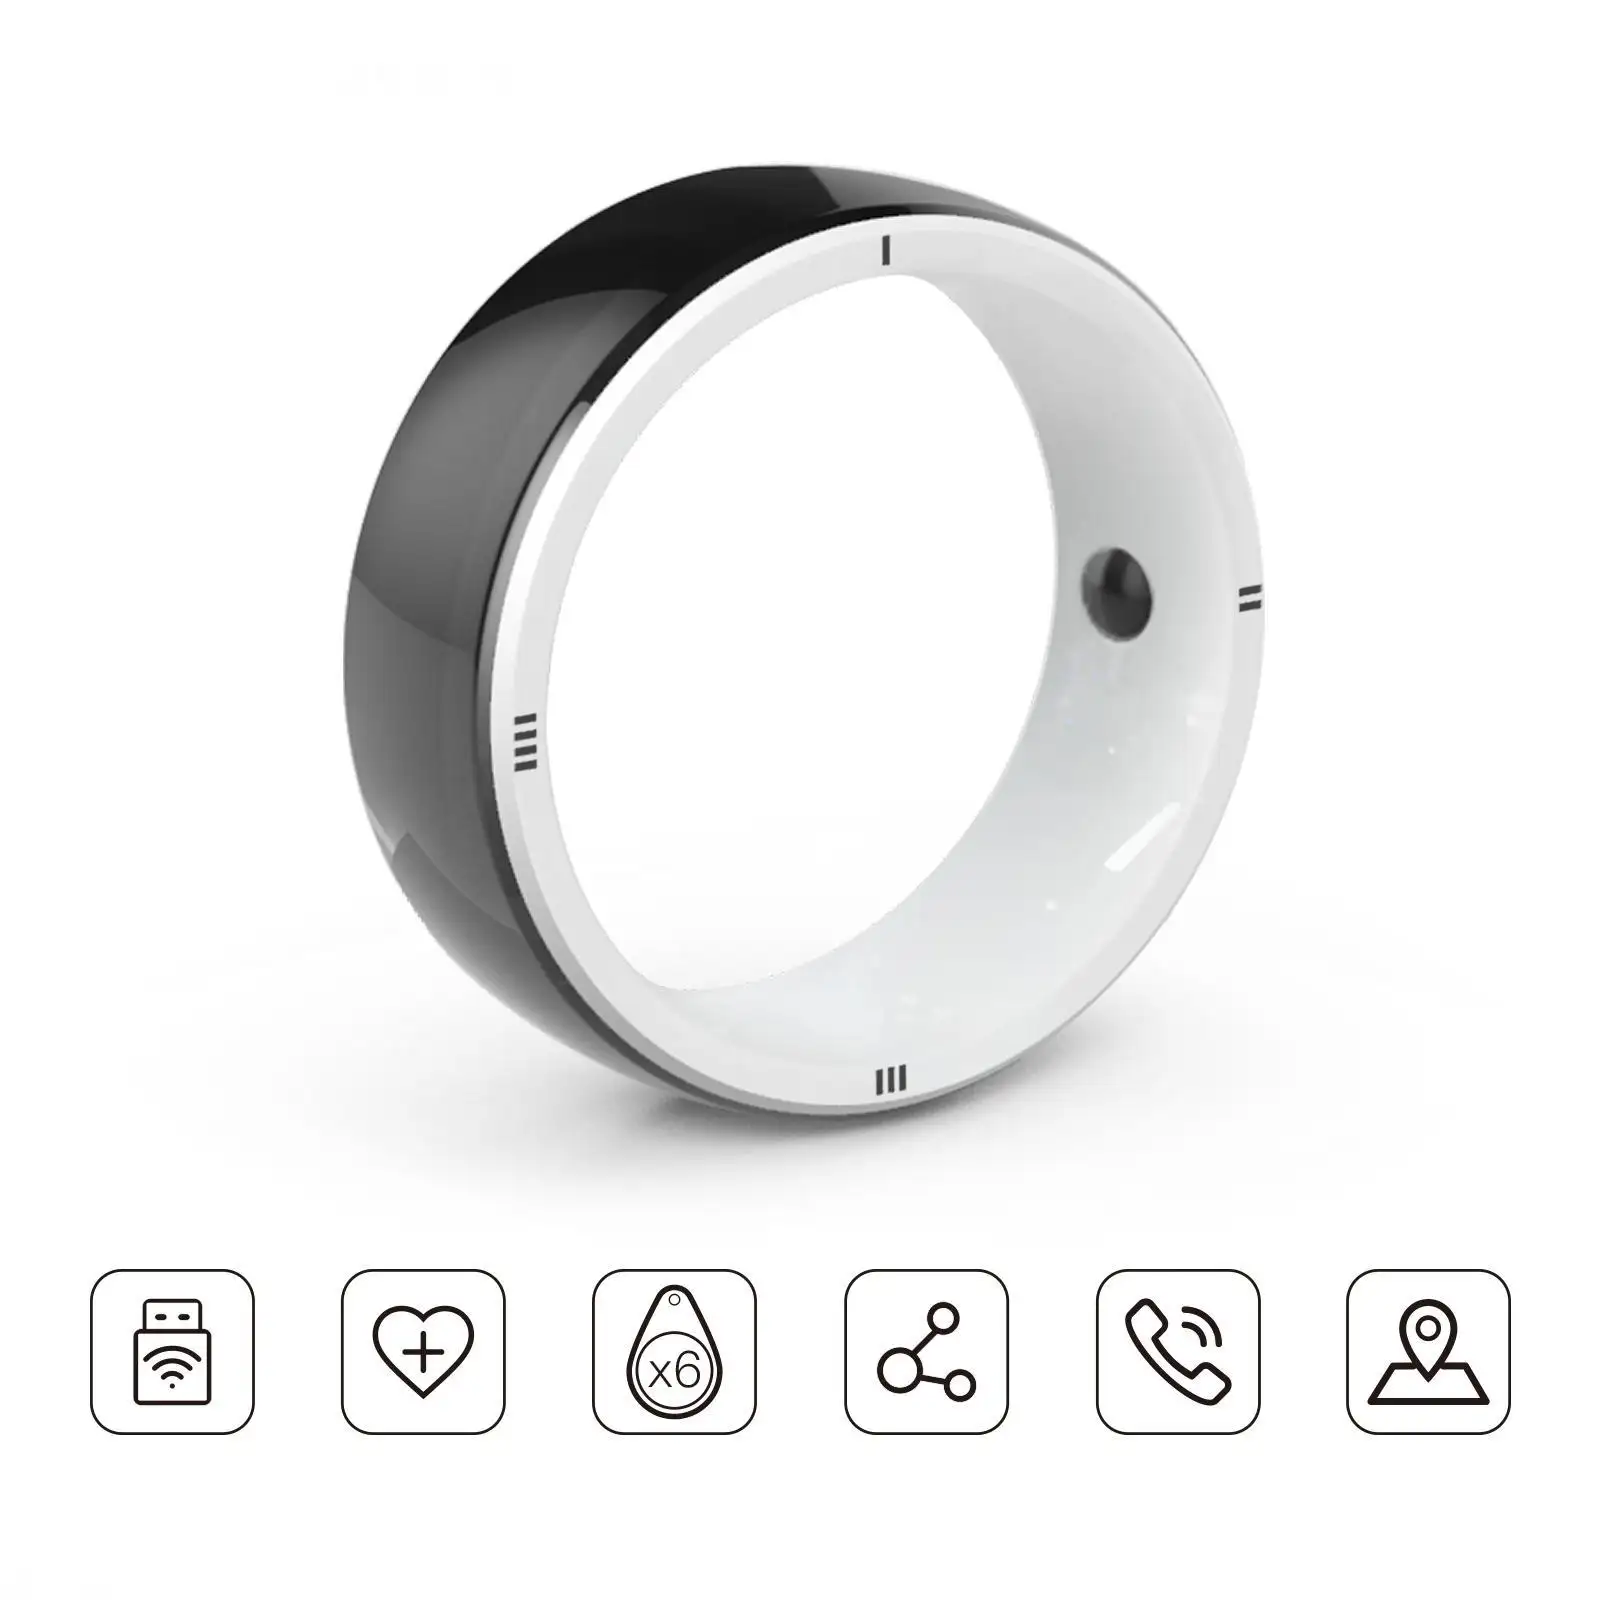 JAKCOM R5 Smart Ring New Smart Ring Best gift with ac dc adapter 100 240v 12v center speaker stand 821 1536 a lcd earbud clips